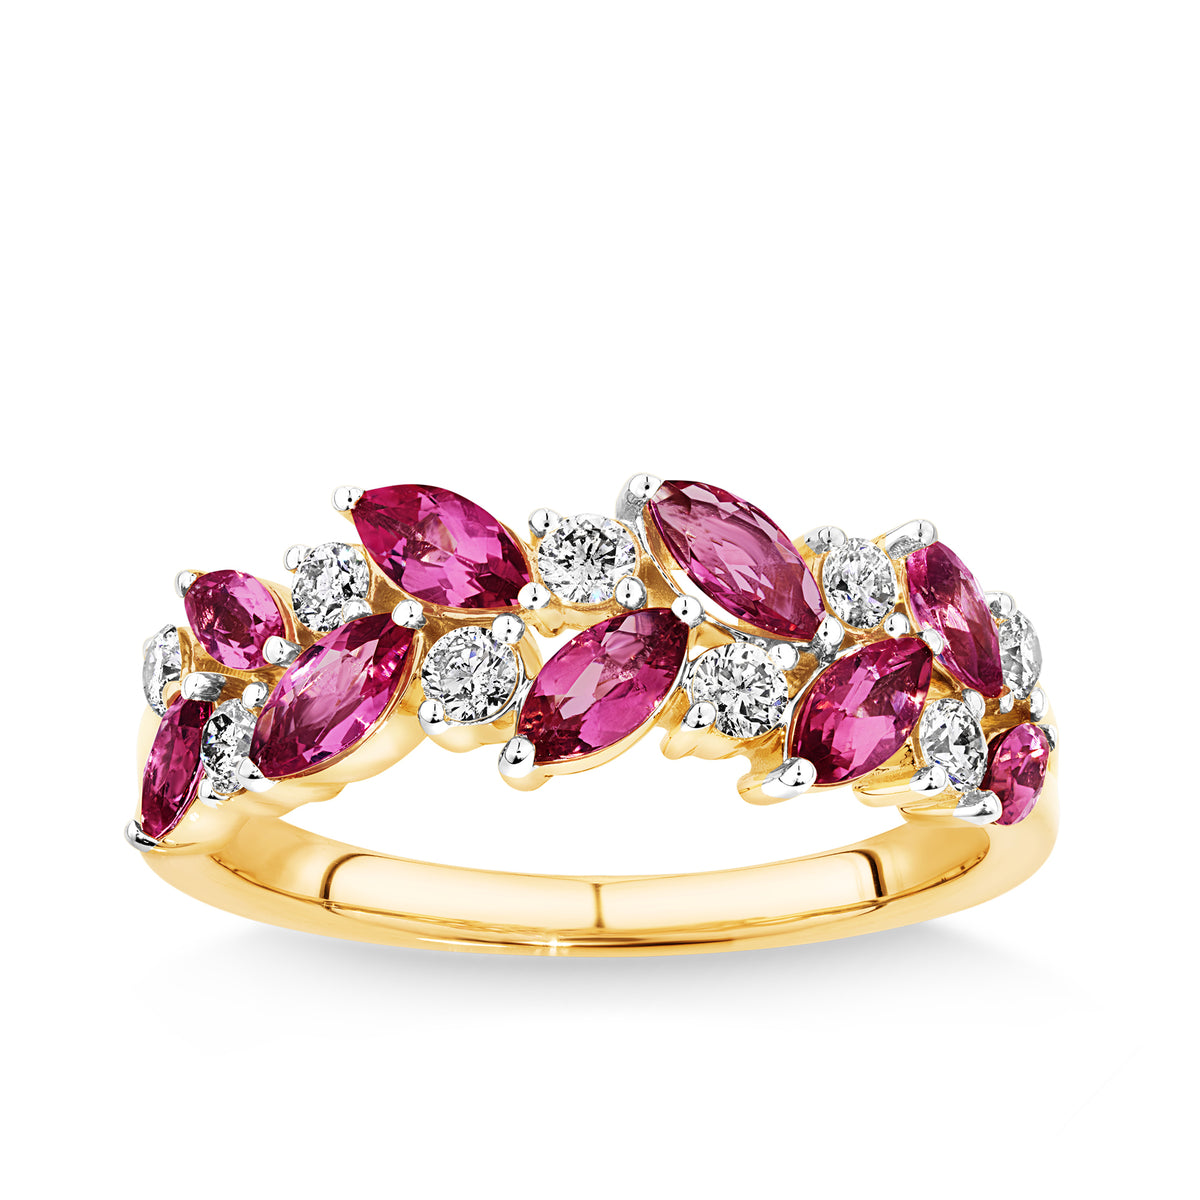 Marquise Cut Pink Tourmaline & 0.30ct TW Diamond Ring in 9ct Yellow Gold